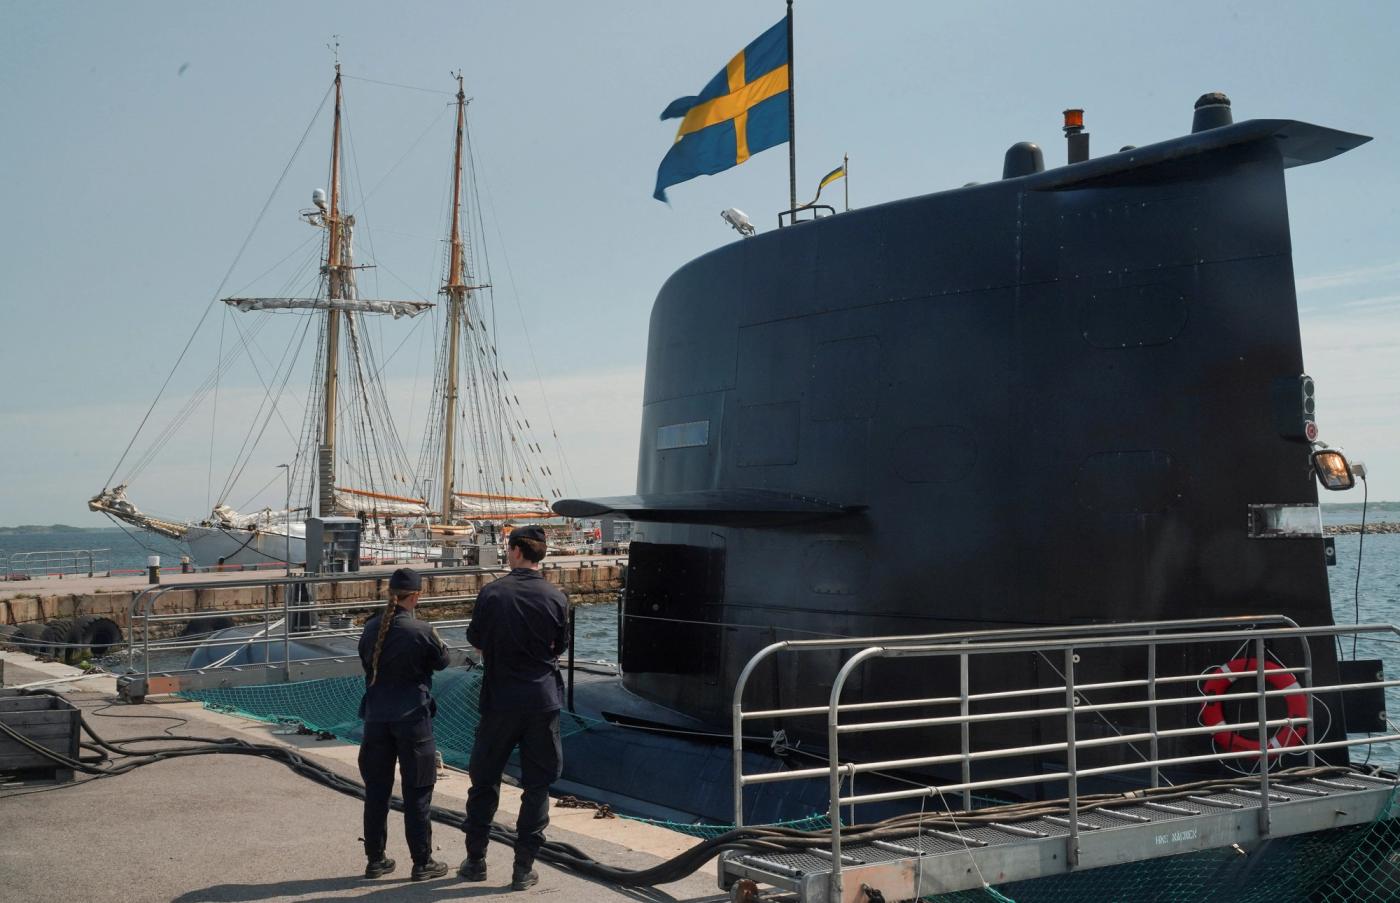 Sailors stand in front of the Swedish submarine HMS Gotland, as it lies in a port at the naval base of Karlskrona, Sweden.